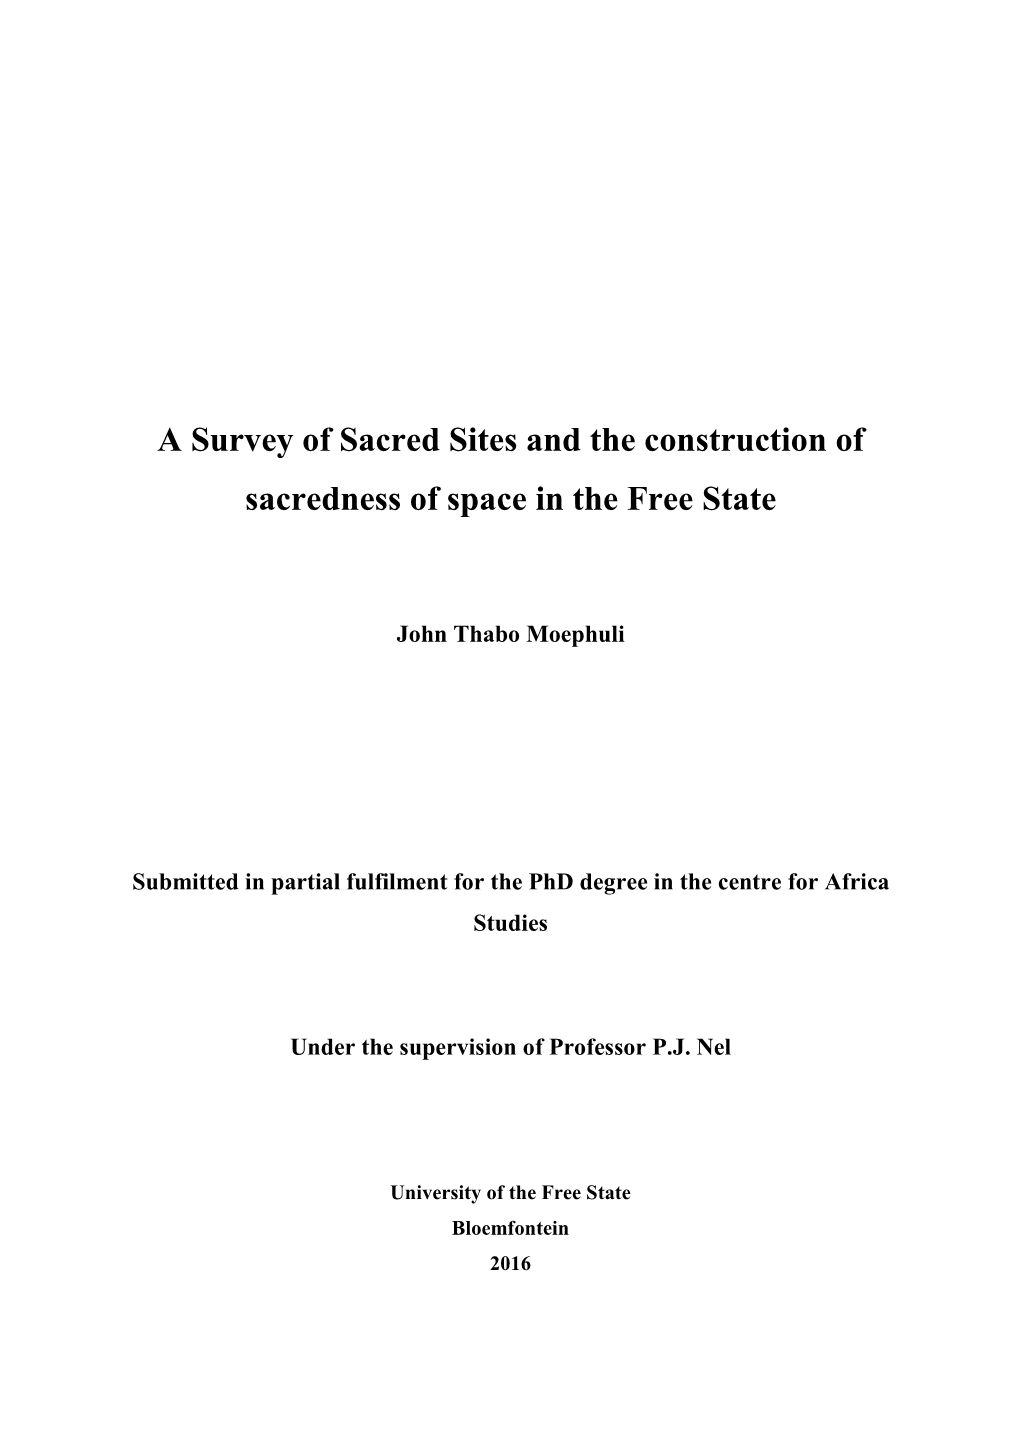 A Survey of Sacred Sites and the Construction of Sacredness of Space in the Free State